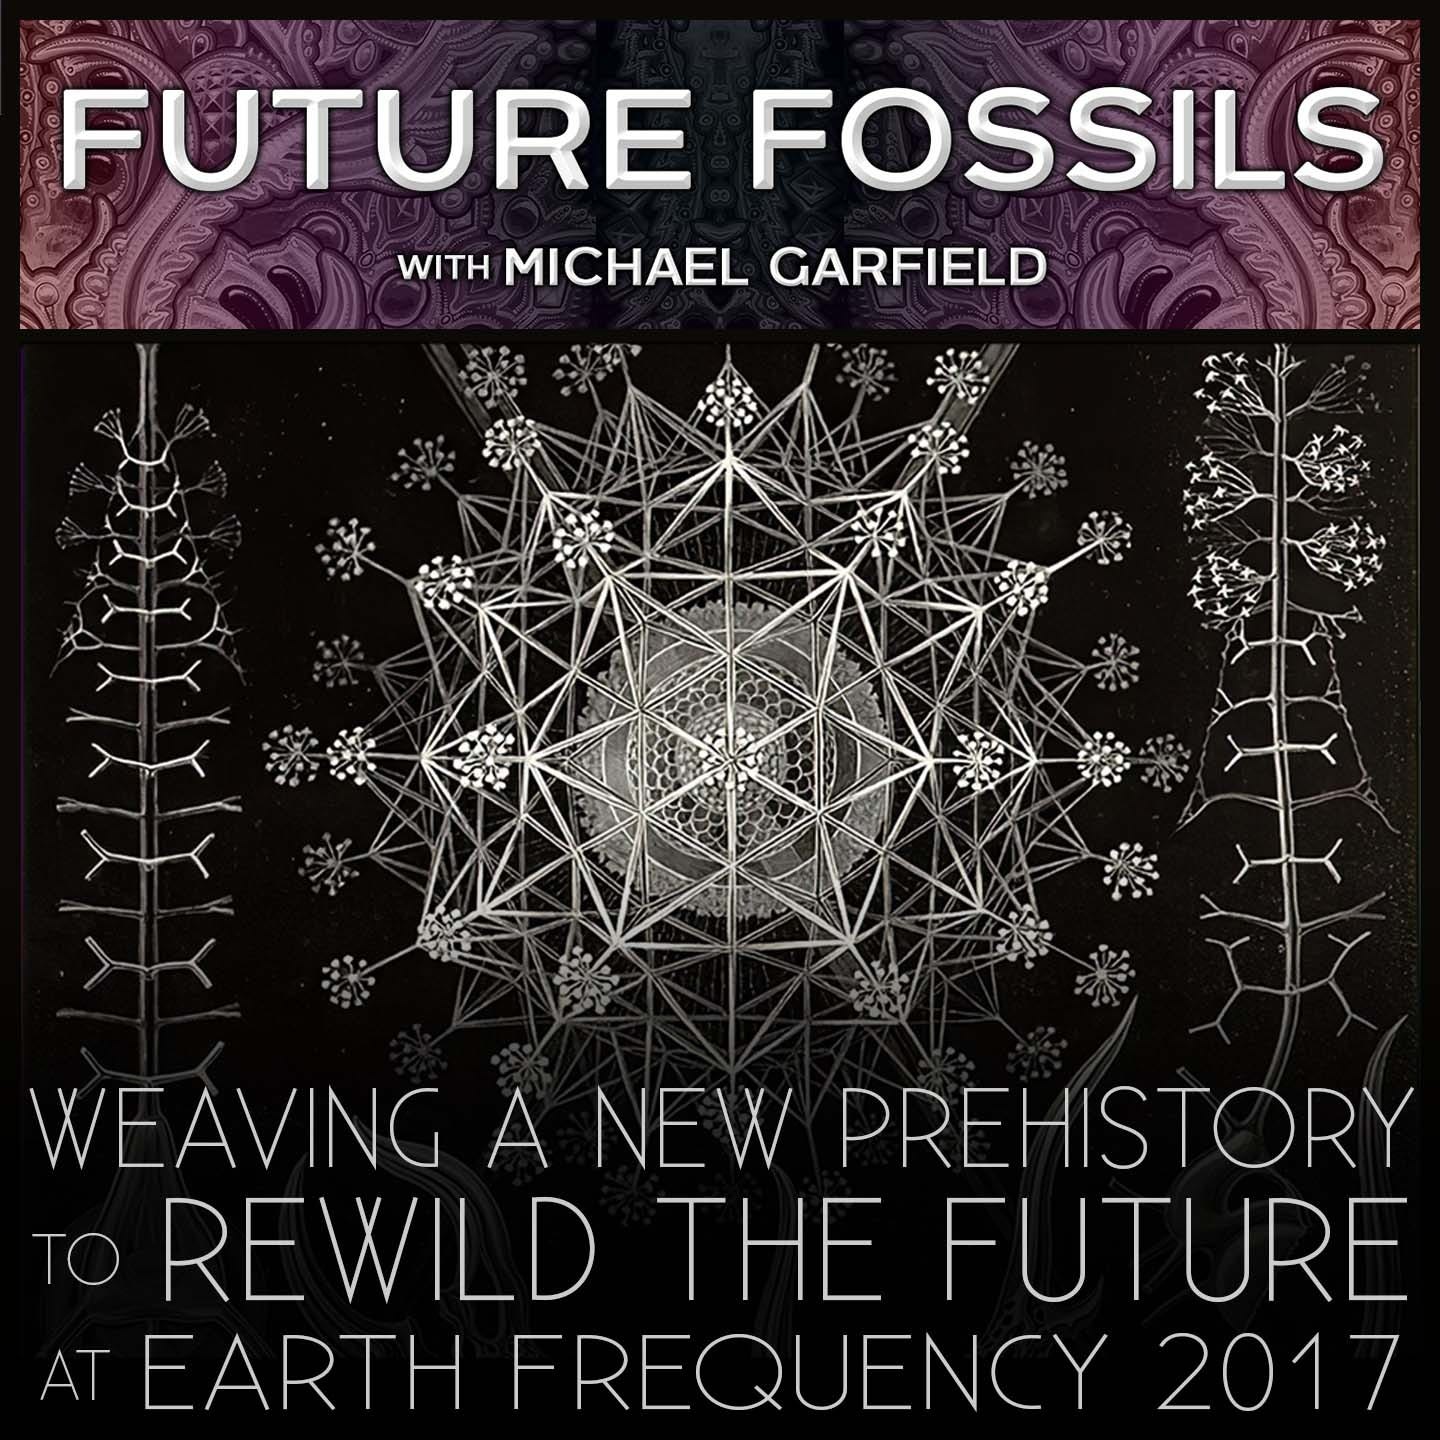 145 - Weaving A New Prehistory to Rewild The Future - Michael Garfield at Earth Frequency Festival 2017